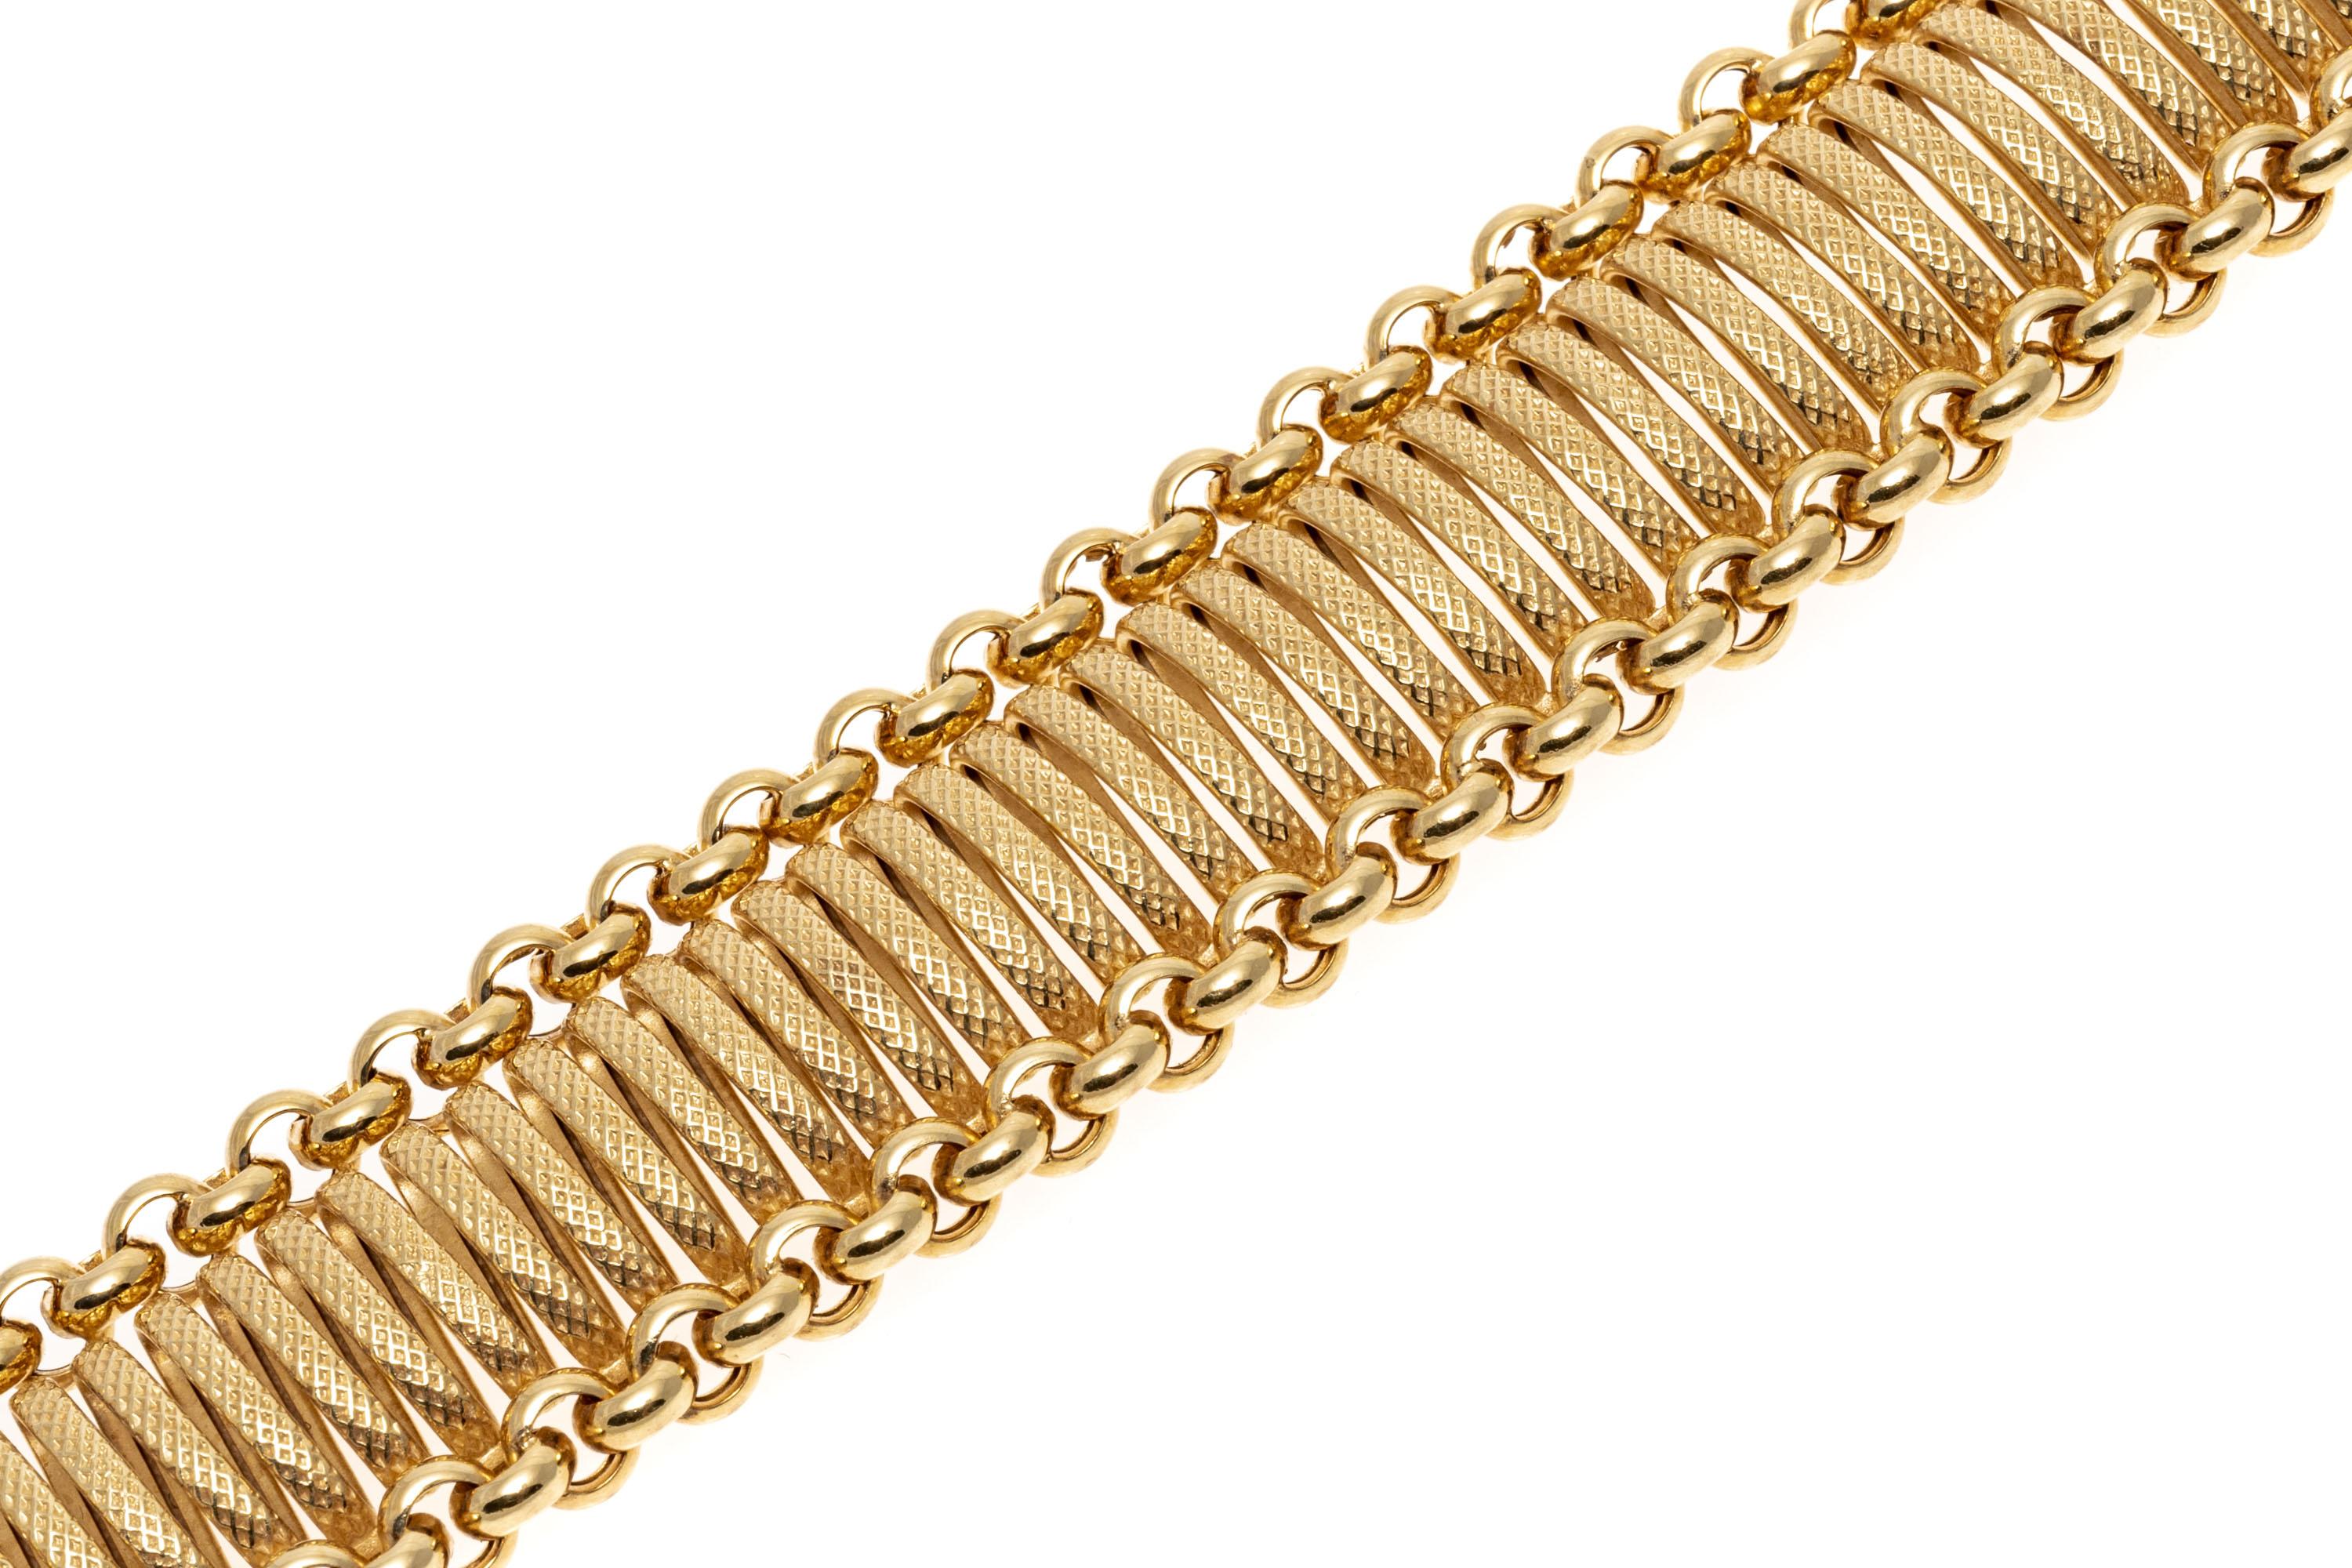 A unique 14K yellow gold bracelet. A diamond cut thread runs through the center of the bracelet in a serpentine design. Trimming the edges of the bracelet are round links style chains with a bright polished finish. Hidden box style clasp with safety